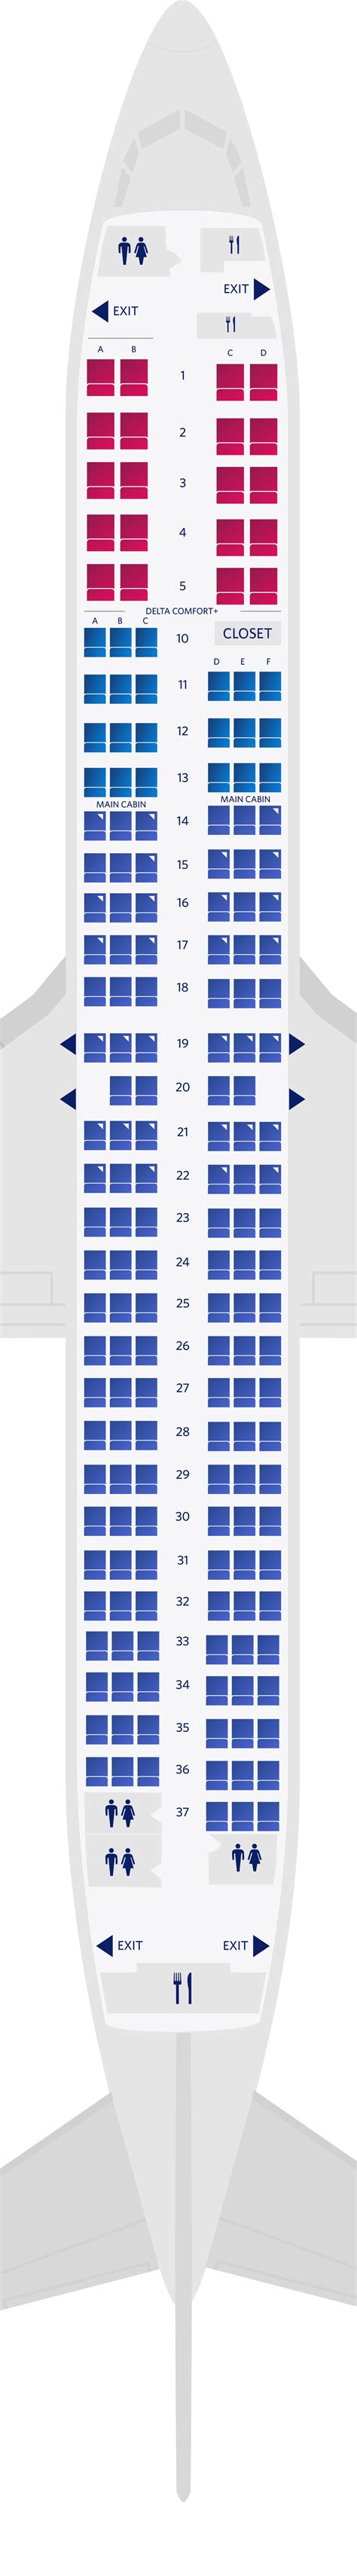 boeing 737 seating chart united airlines